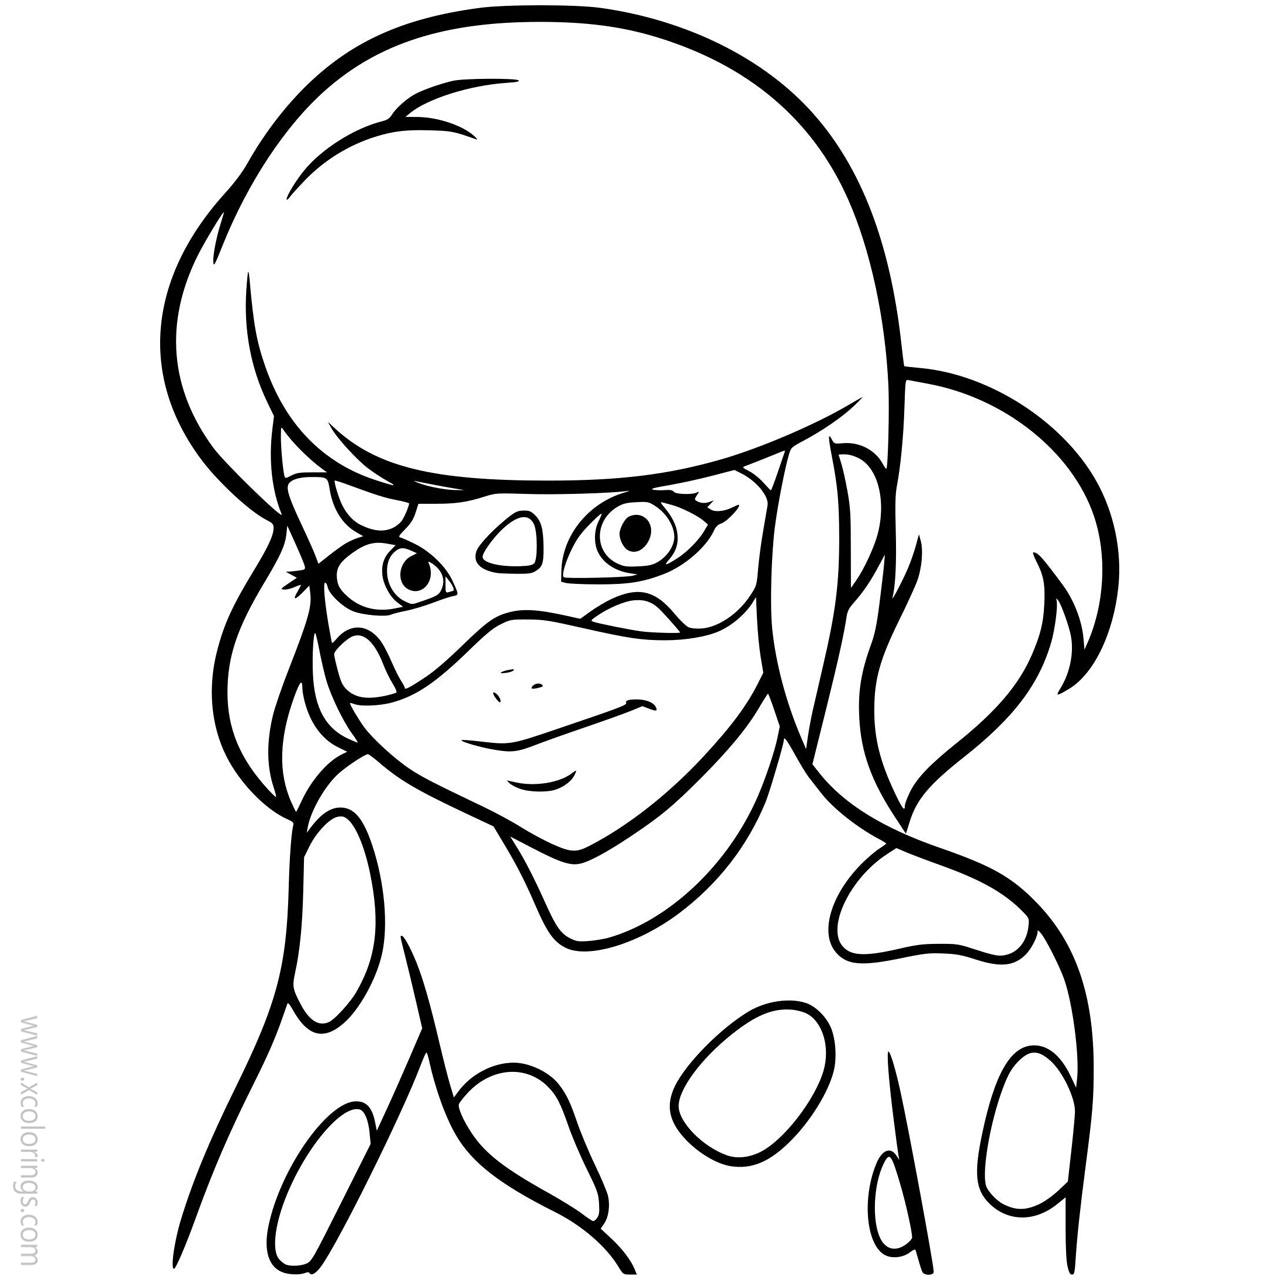 Free Cute Miraculous Ladybug Coloring Pages printable